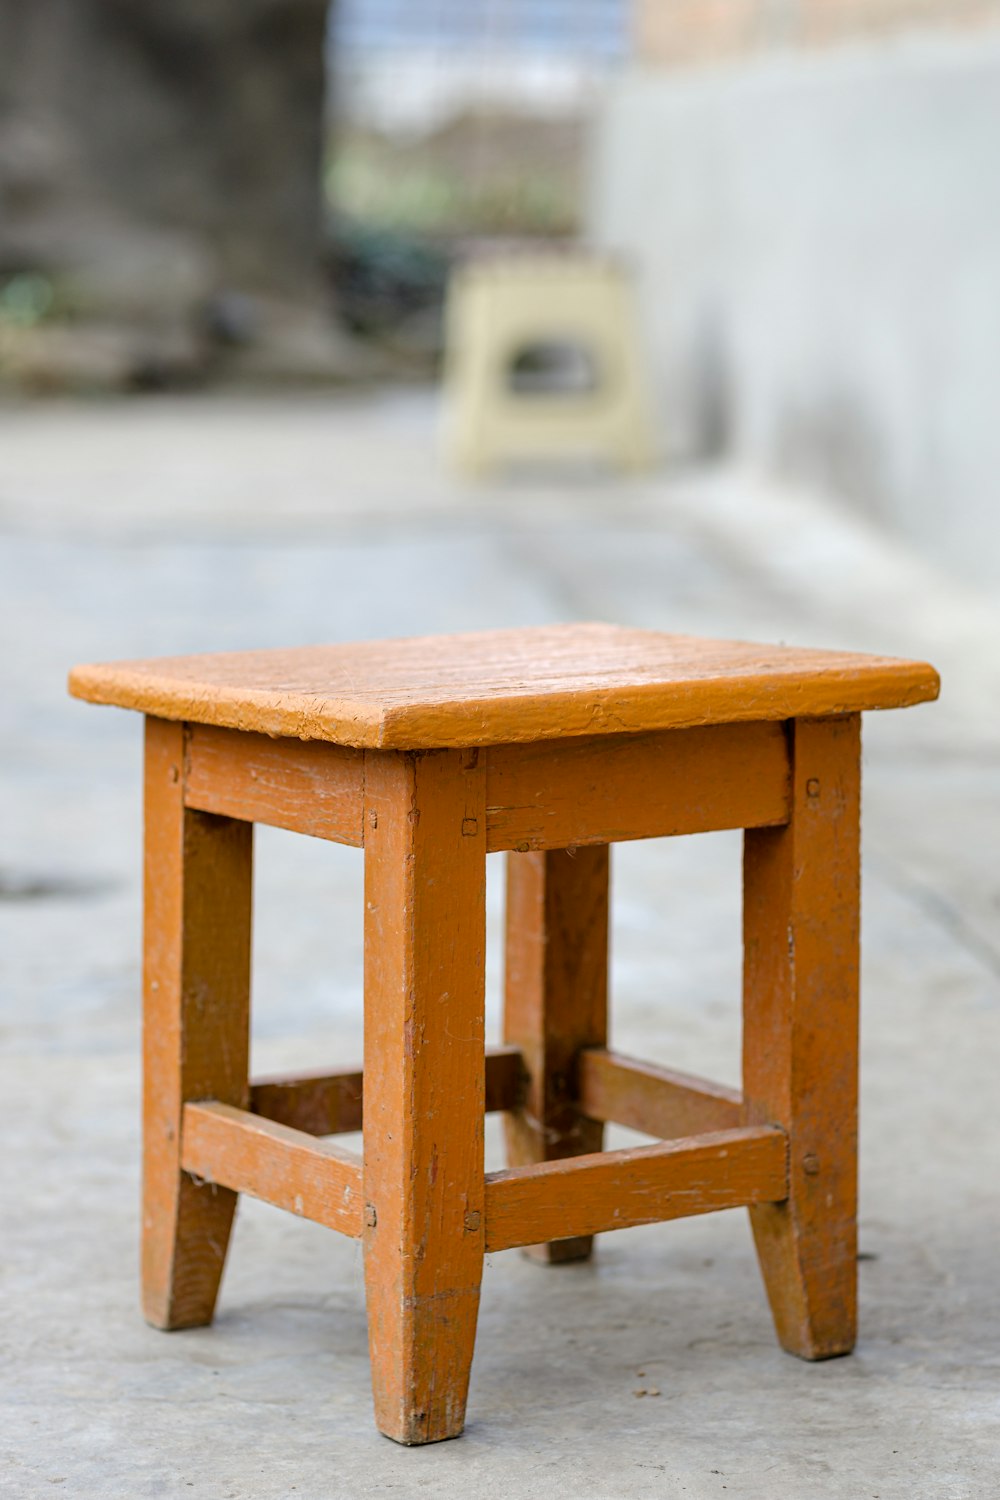 a small wooden table sitting on top of a sidewalk